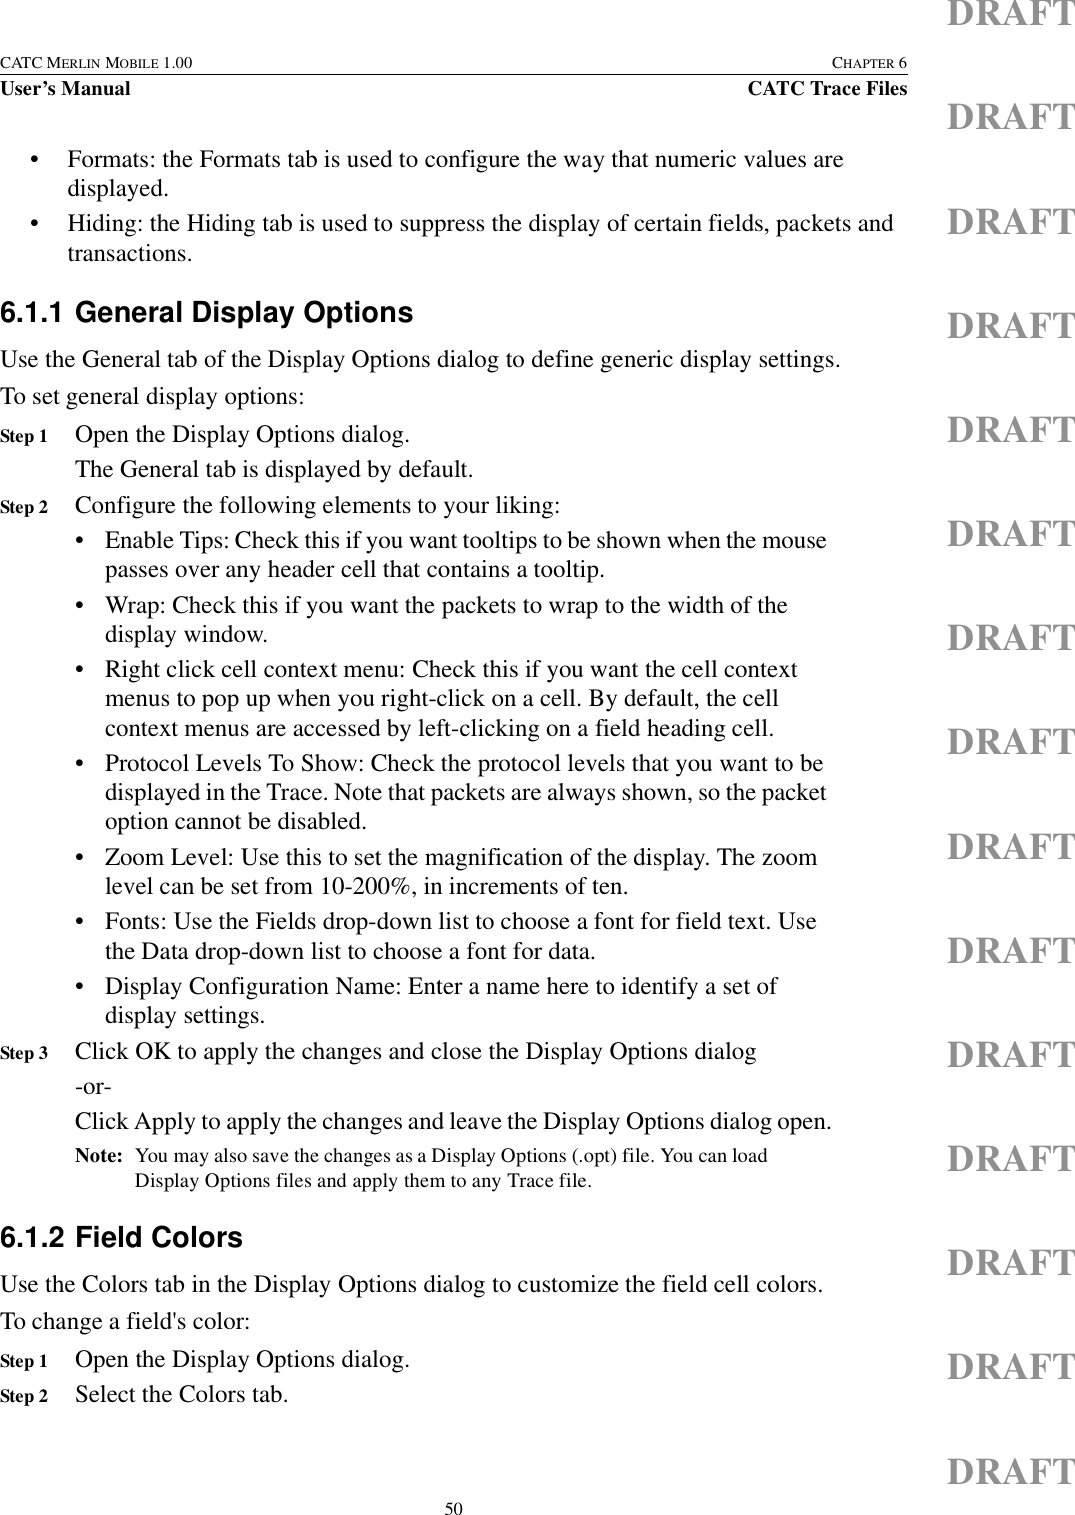 50CATC MERLIN MOBILE 1.00 CHAPTER 6User’s Manual CATC Trace FilesDRAFTDRAFTDRAFTDRAFTDRAFTDRAFTDRAFTDRAFTDRAFTDRAFTDRAFTDRAFTDRAFTDRAFTDRAFT• Formats: the Formats tab is used to configure the way that numeric values are displayed.• Hiding: the Hiding tab is used to suppress the display of certain fields, packets and transactions.6.1.1 General Display OptionsUse the General tab of the Display Options dialog to define generic display settings.To set general display options:Step 1 Open the Display Options dialog.The General tab is displayed by default.Step 2 Configure the following elements to your liking:• Enable Tips: Check this if you want tooltips to be shown when the mouse passes over any header cell that contains a tooltip.• Wrap: Check this if you want the packets to wrap to the width of the display window.• Right click cell context menu: Check this if you want the cell context menus to pop up when you right-click on a cell. By default, the cell context menus are accessed by left-clicking on a field heading cell.• Protocol Levels To Show: Check the protocol levels that you want to be displayed in the Trace. Note that packets are always shown, so the packet option cannot be disabled.• Zoom Level: Use this to set the magnification of the display. The zoom level can be set from 10-200%, in increments of ten.• Fonts: Use the Fields drop-down list to choose a font for field text. Use the Data drop-down list to choose a font for data.• Display Configuration Name: Enter a name here to identify a set of display settings.Step 3 Click OK to apply the changes and close the Display Options dialog-or-Click Apply to apply the changes and leave the Display Options dialog open.Note: You may also save the changes as a Display Options (.opt) file. You can load Display Options files and apply them to any Trace file.6.1.2 Field ColorsUse the Colors tab in the Display Options dialog to customize the field cell colors.To change a field&apos;s color:Step 1 Open the Display Options dialog.Step 2 Select the Colors tab.